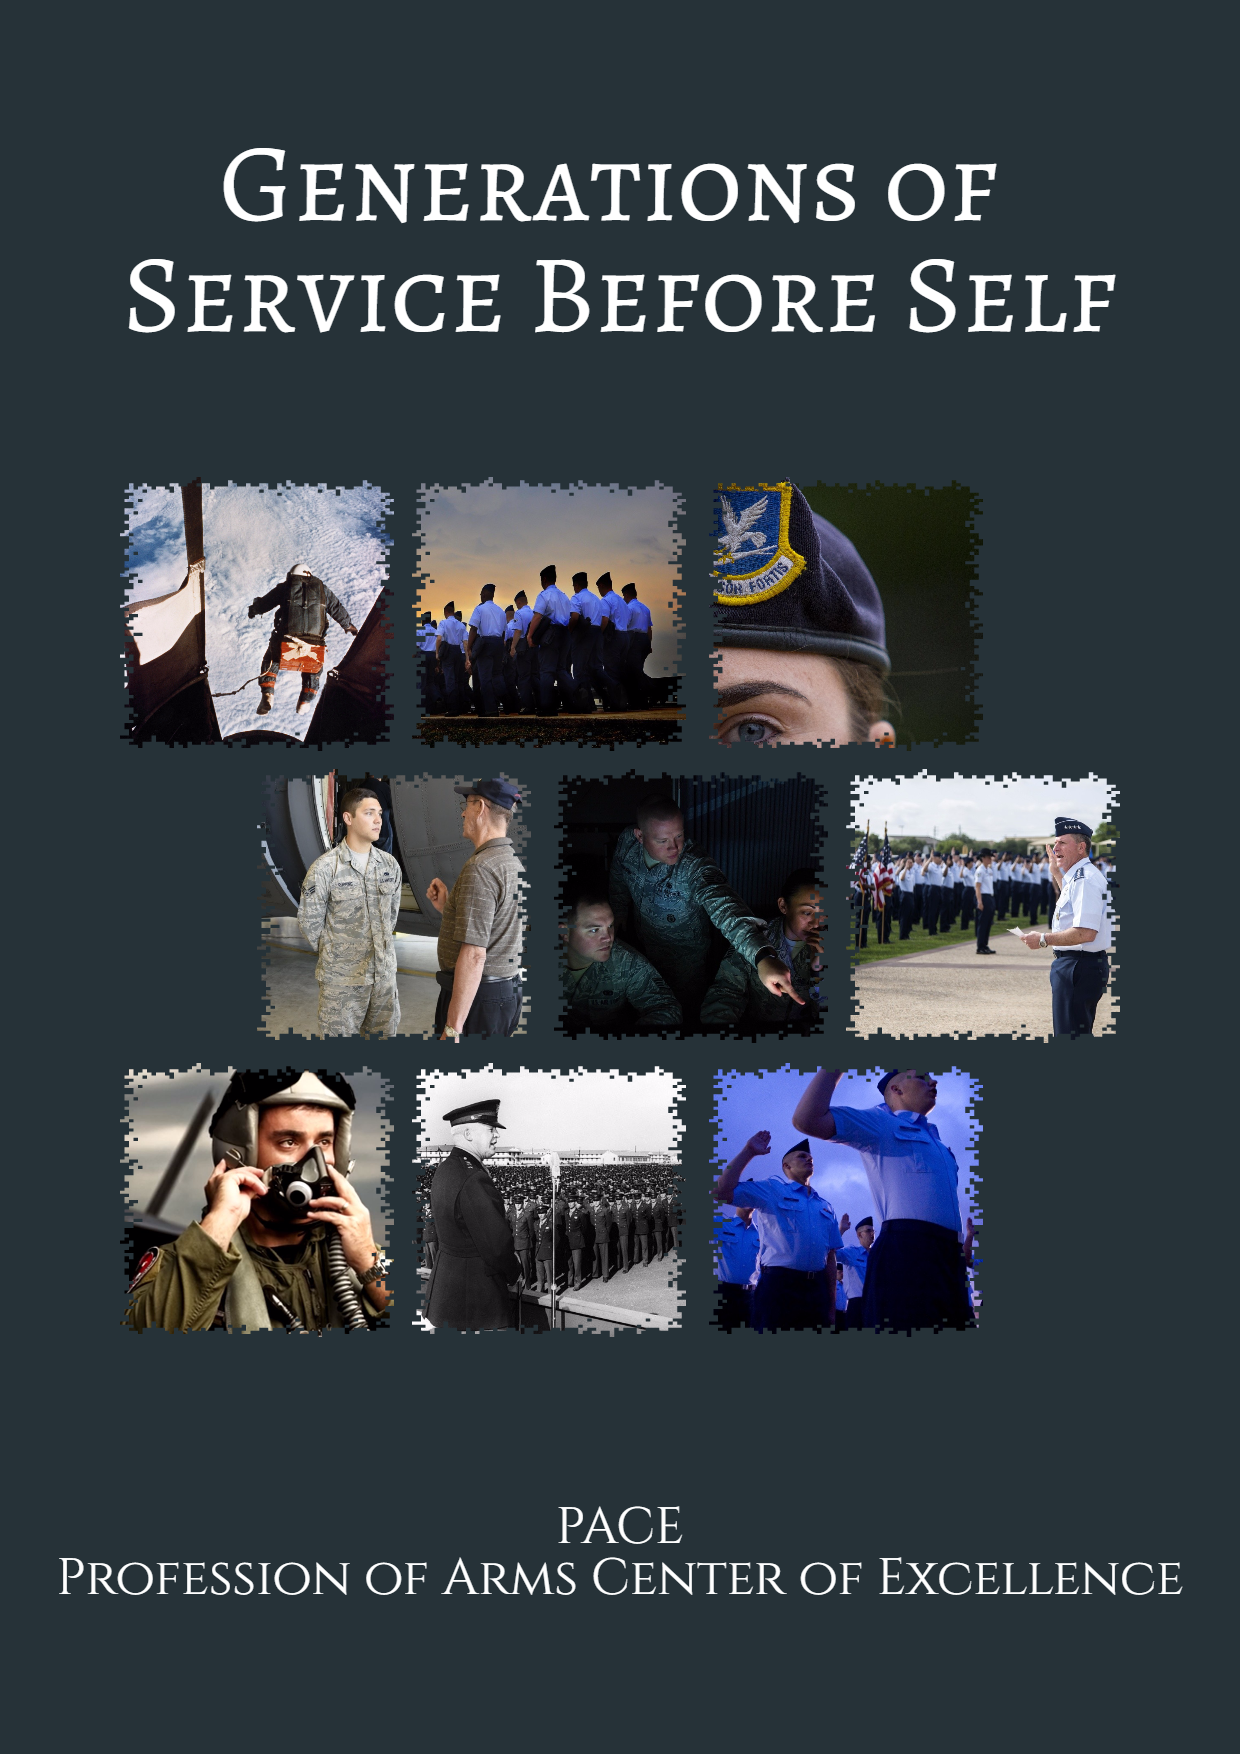 Generations of Service Before Self Design 